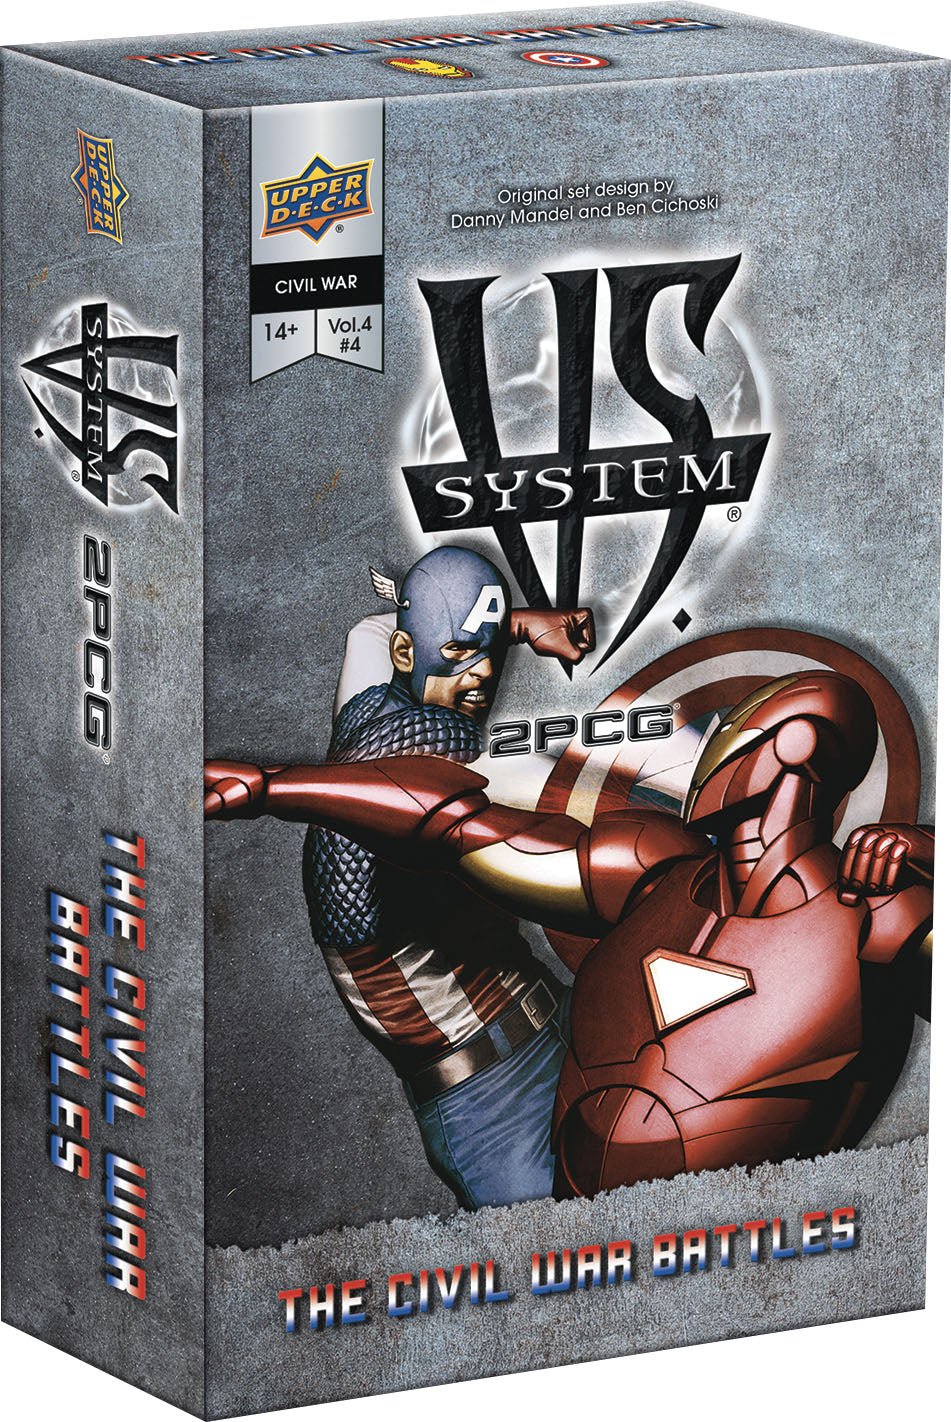 VS System 2PCG: Marvel - The Civil War Battles (1 of 3) - The Fourth Place